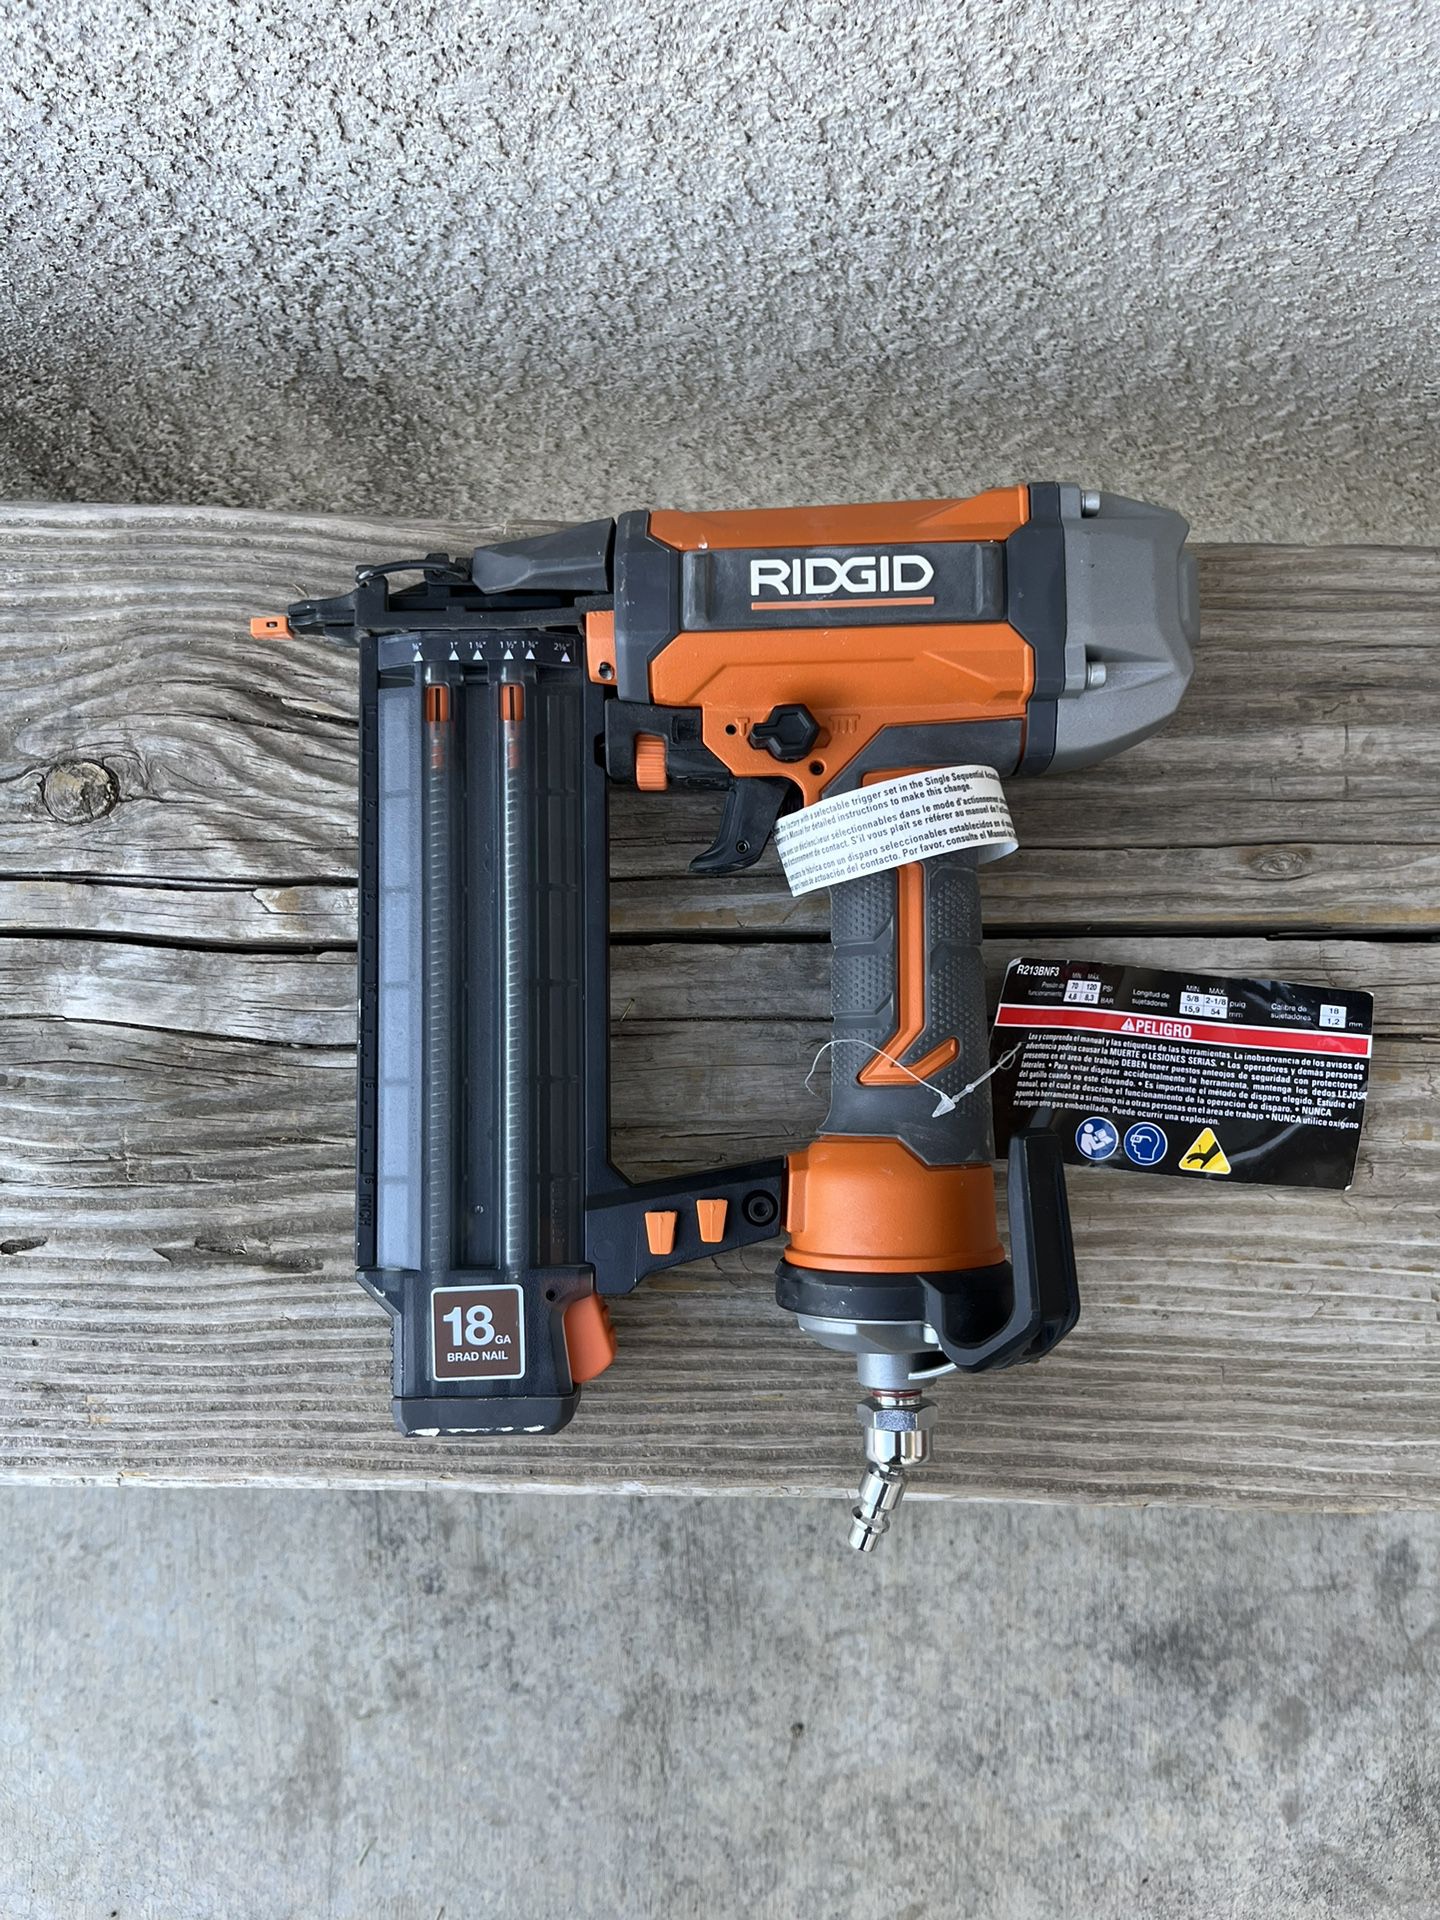 RIDGID Pneumatic 18-Gauge 2-1/8 in. Brad Nailer with CLEAN DRIVE Technology